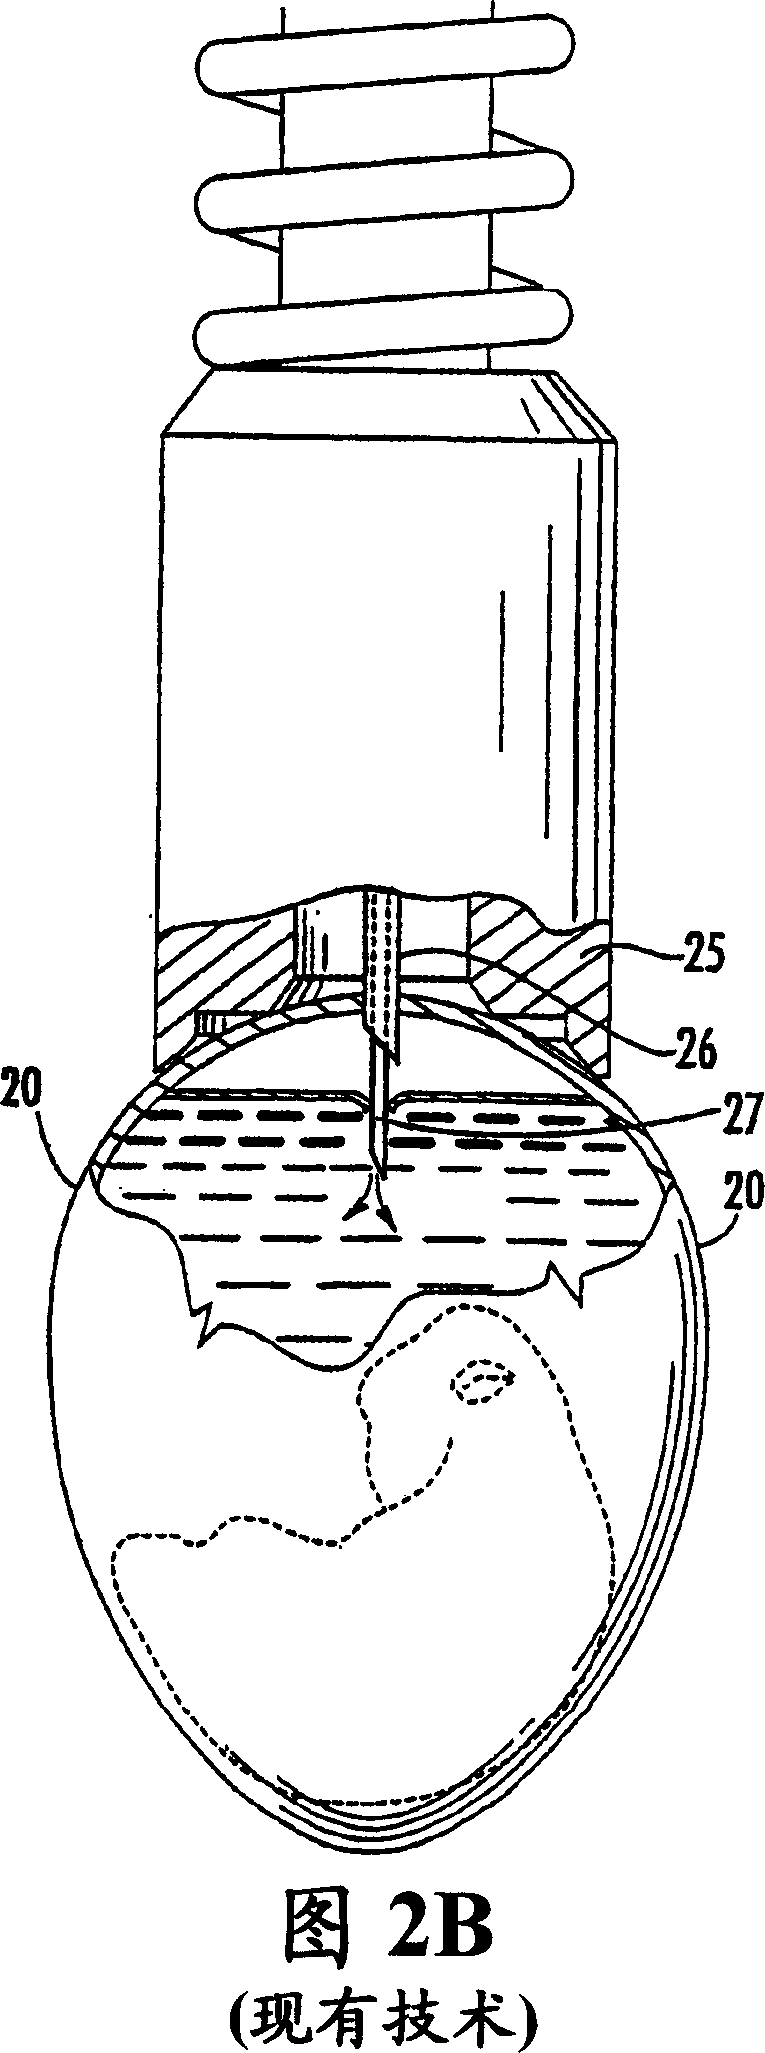 Methods and apparatus for punching through egg shells with reduced force